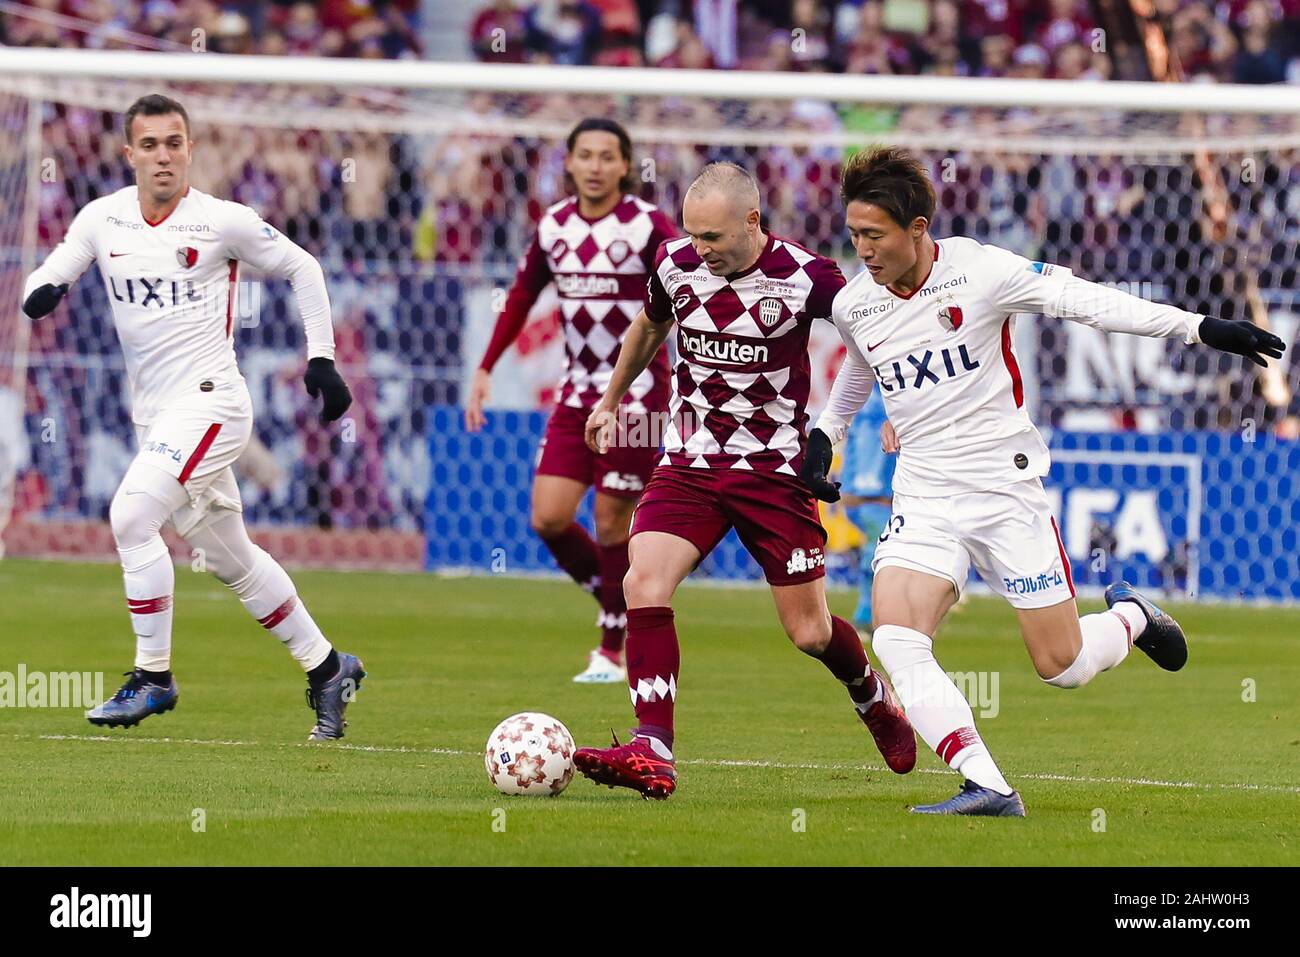 January 1, 2020, Tokyo, Japan: Vissel Kobe's Andres Iniesta (Cap.) in action during the Emperor's Cup JFA 99th Japan Football Championship final match between Vissel Kobe and Kashima Antlers at the new National Stadium. Vissel Kobe defeats Kashima Antlers 2-0. 57,597 people attended the first sports match held at the new National Stadium, which will be a venue for the Tokyo 2020 Olympic and Paralympic Games. (Credit Image: © Rodrigo Reyes Marin/ZUMA Wire) Stock Photo